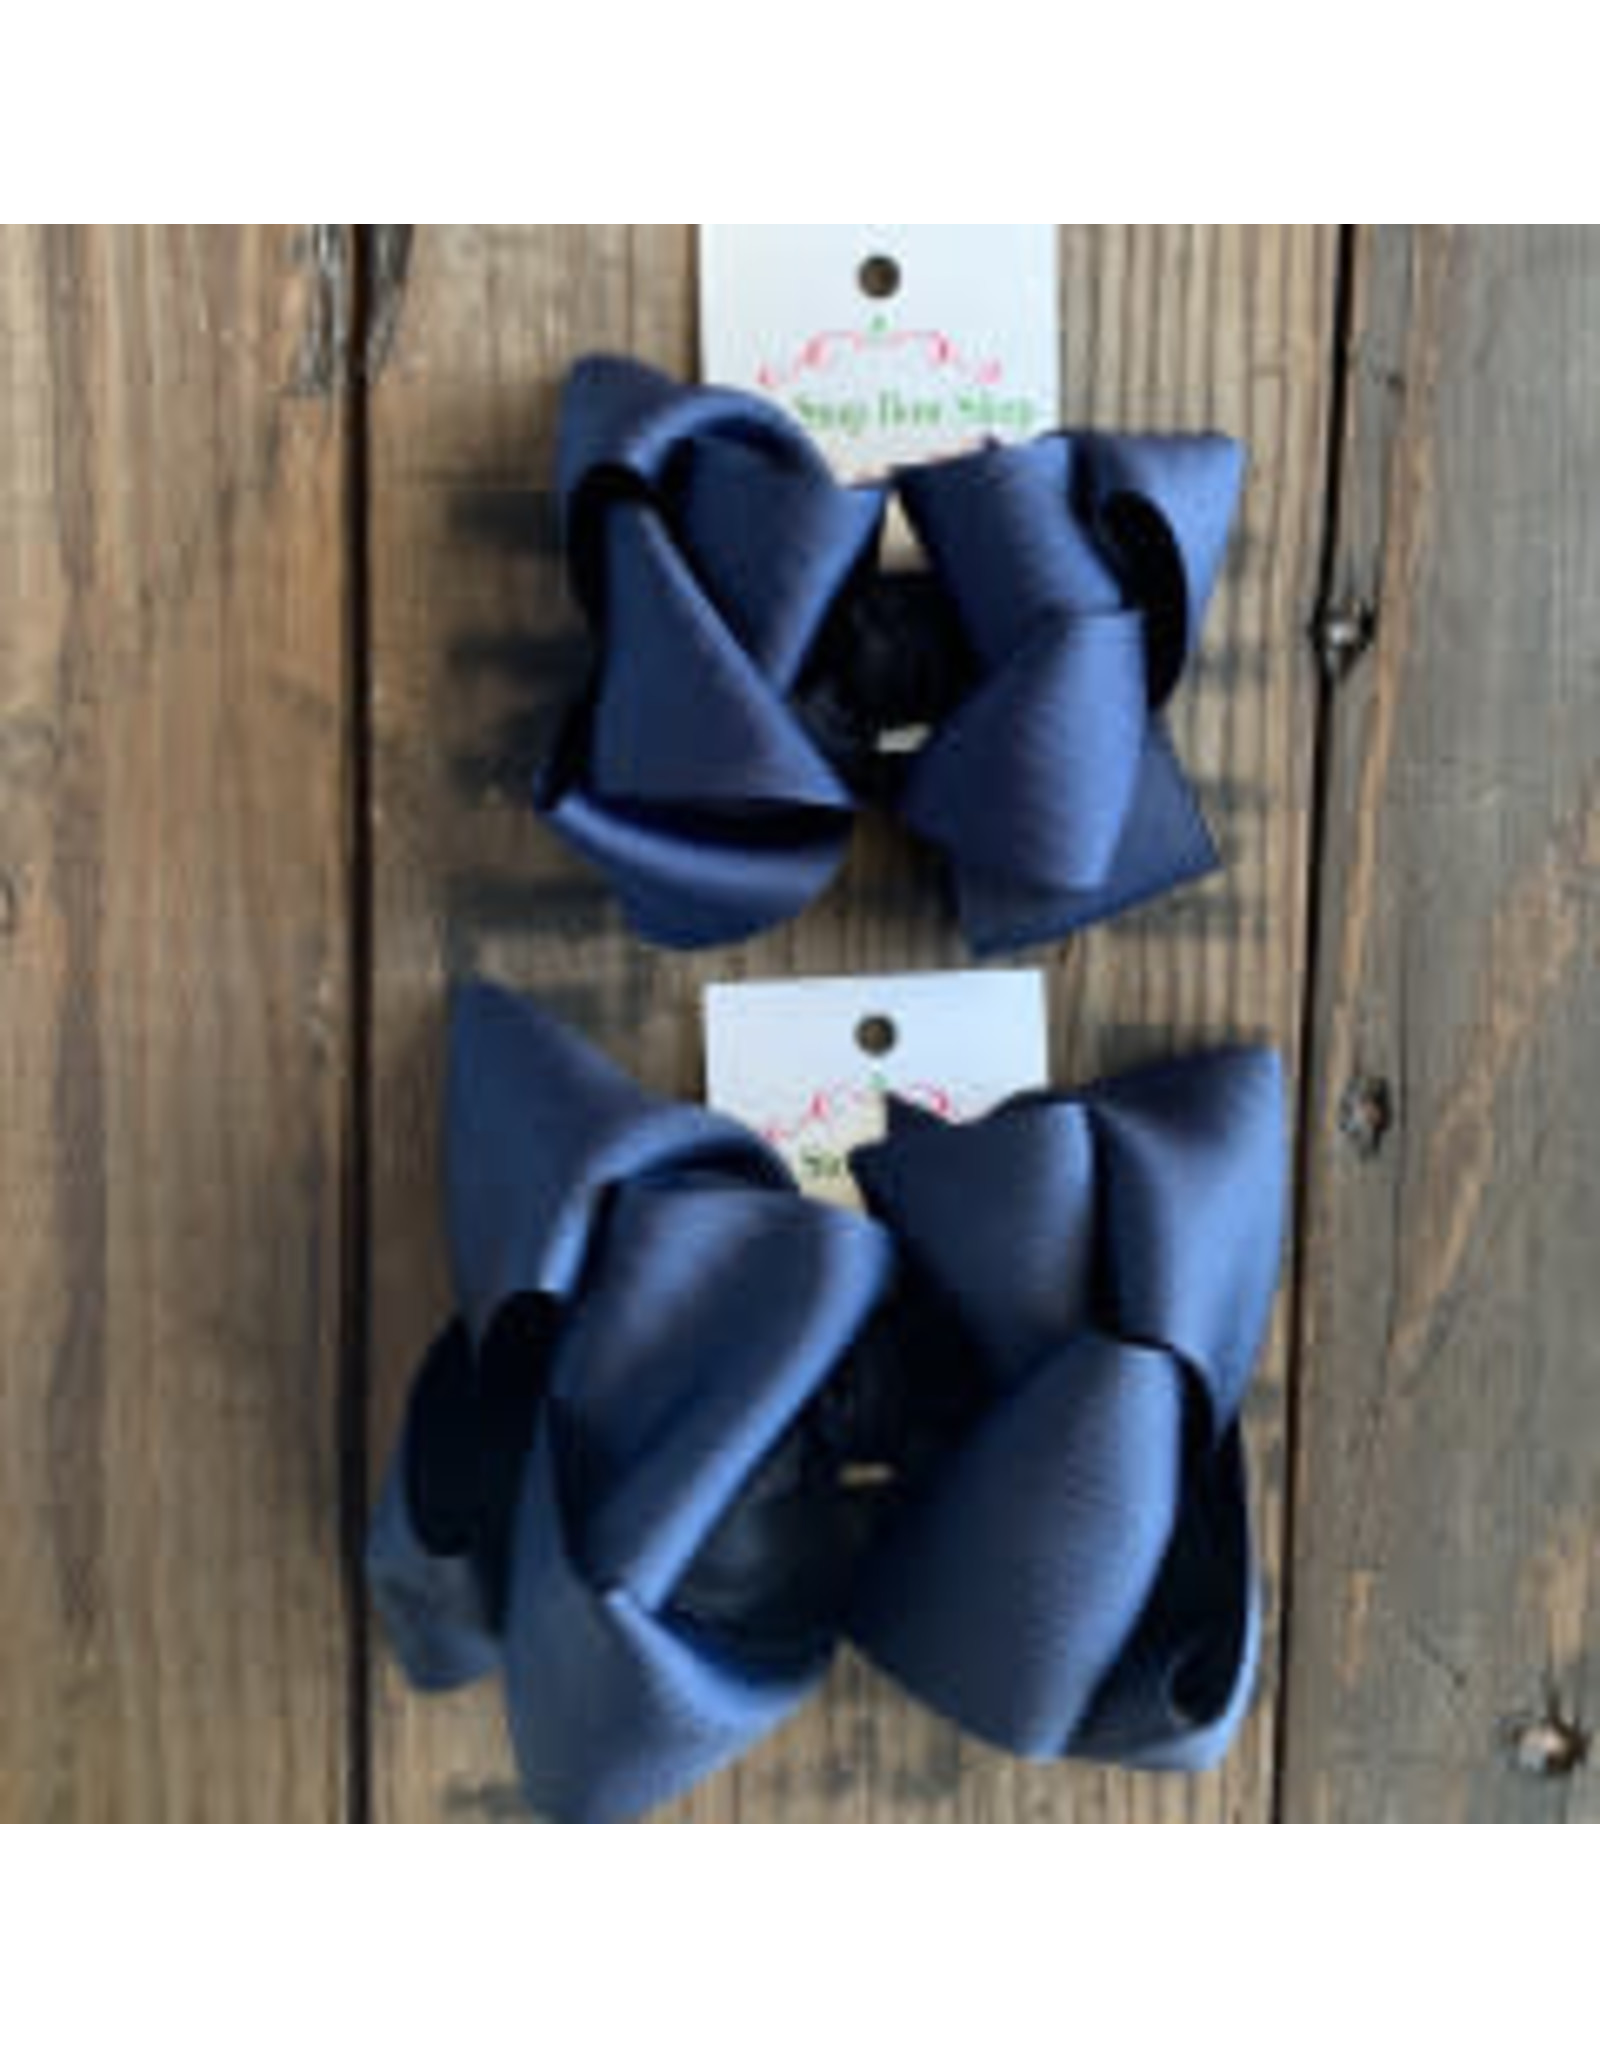 OS - Navy Stacked Grosgrain Bow